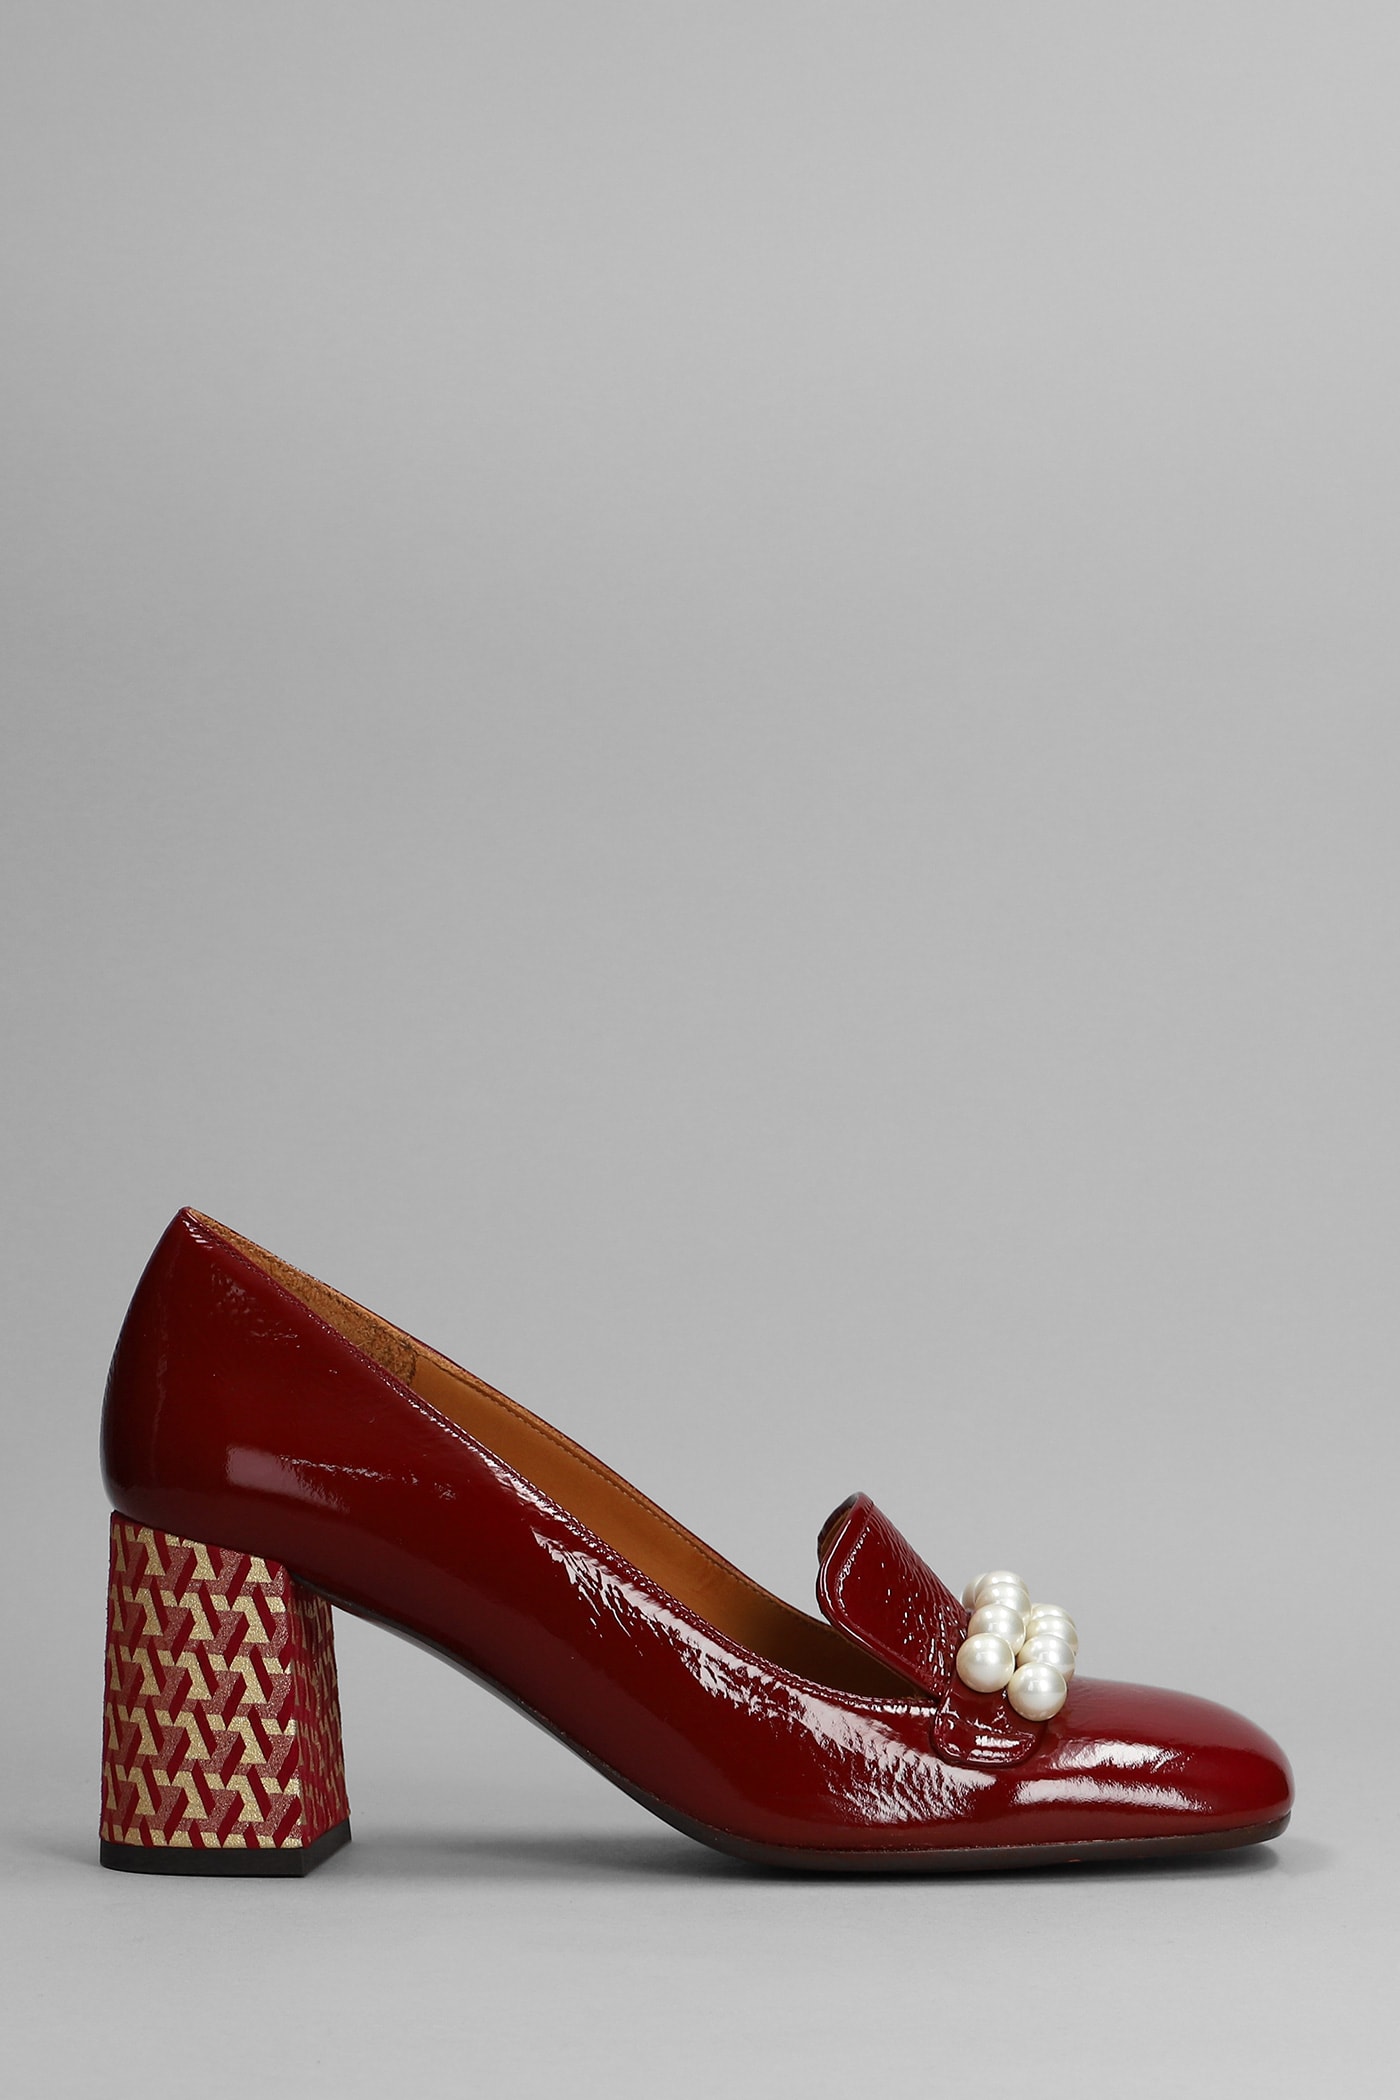 Chie Mihara Petard Pumps In Bordeaux Leather